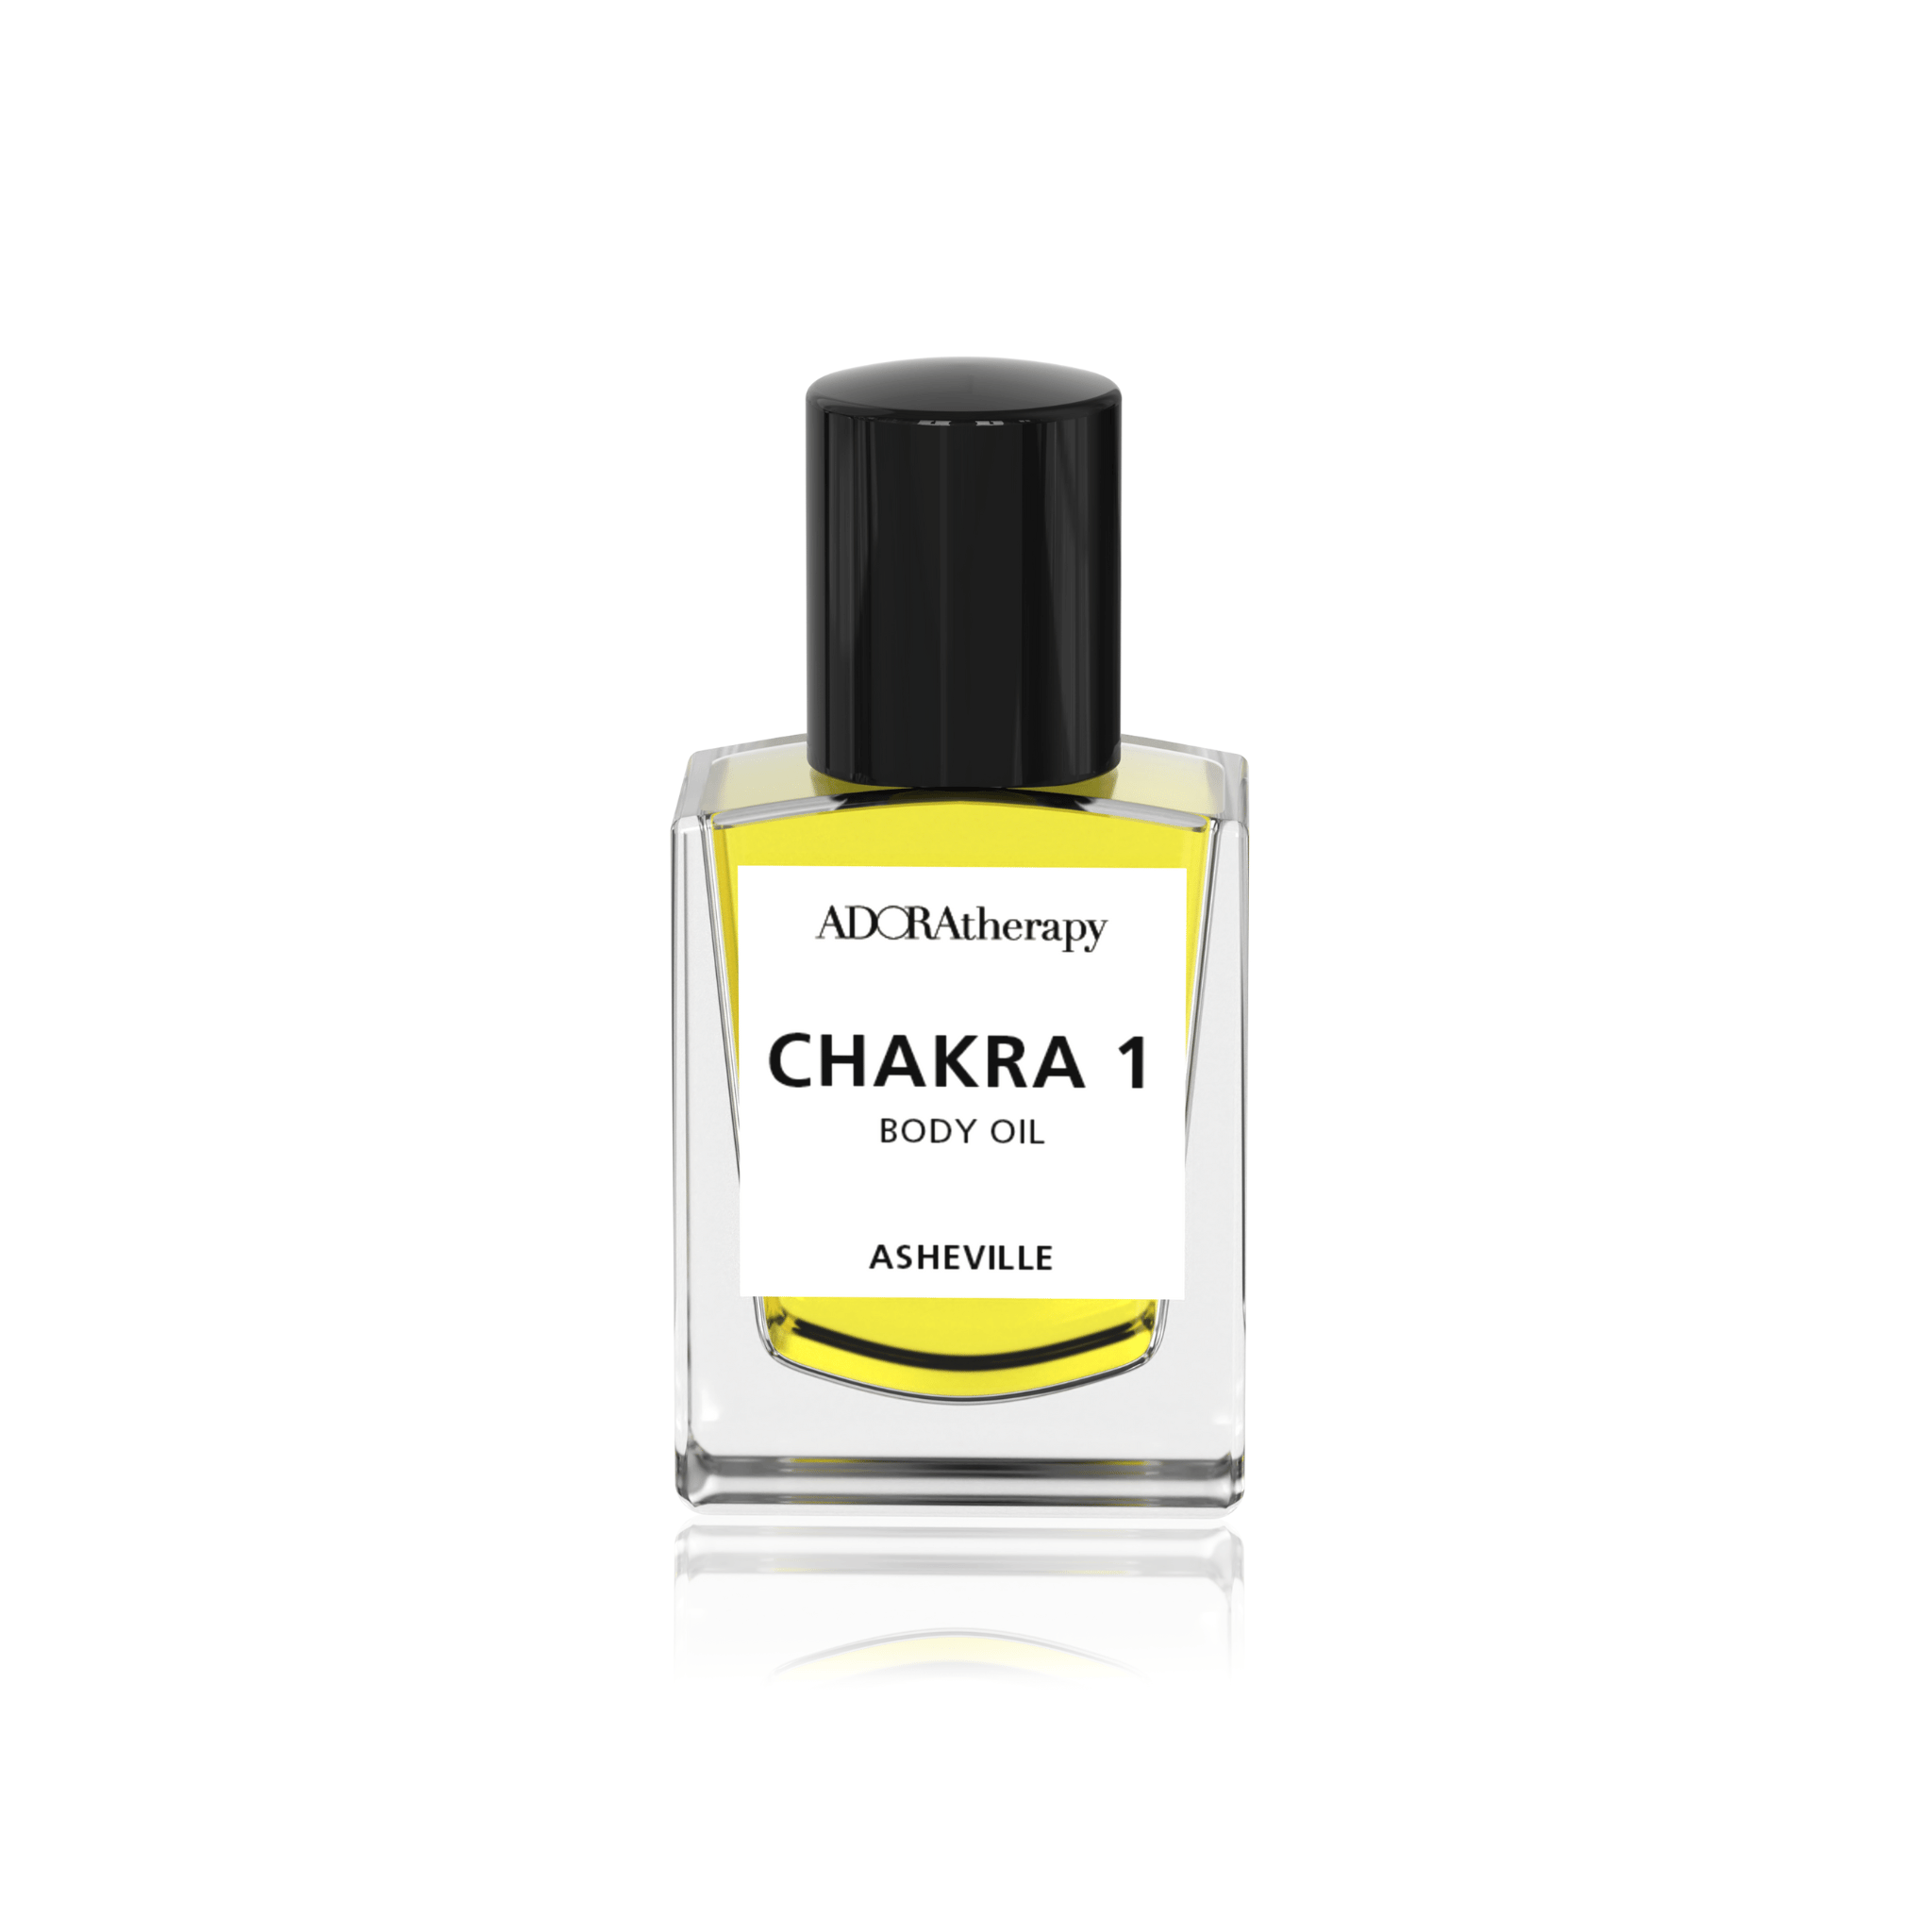 Chakra Dry Touch Healing Body Oil Number 1